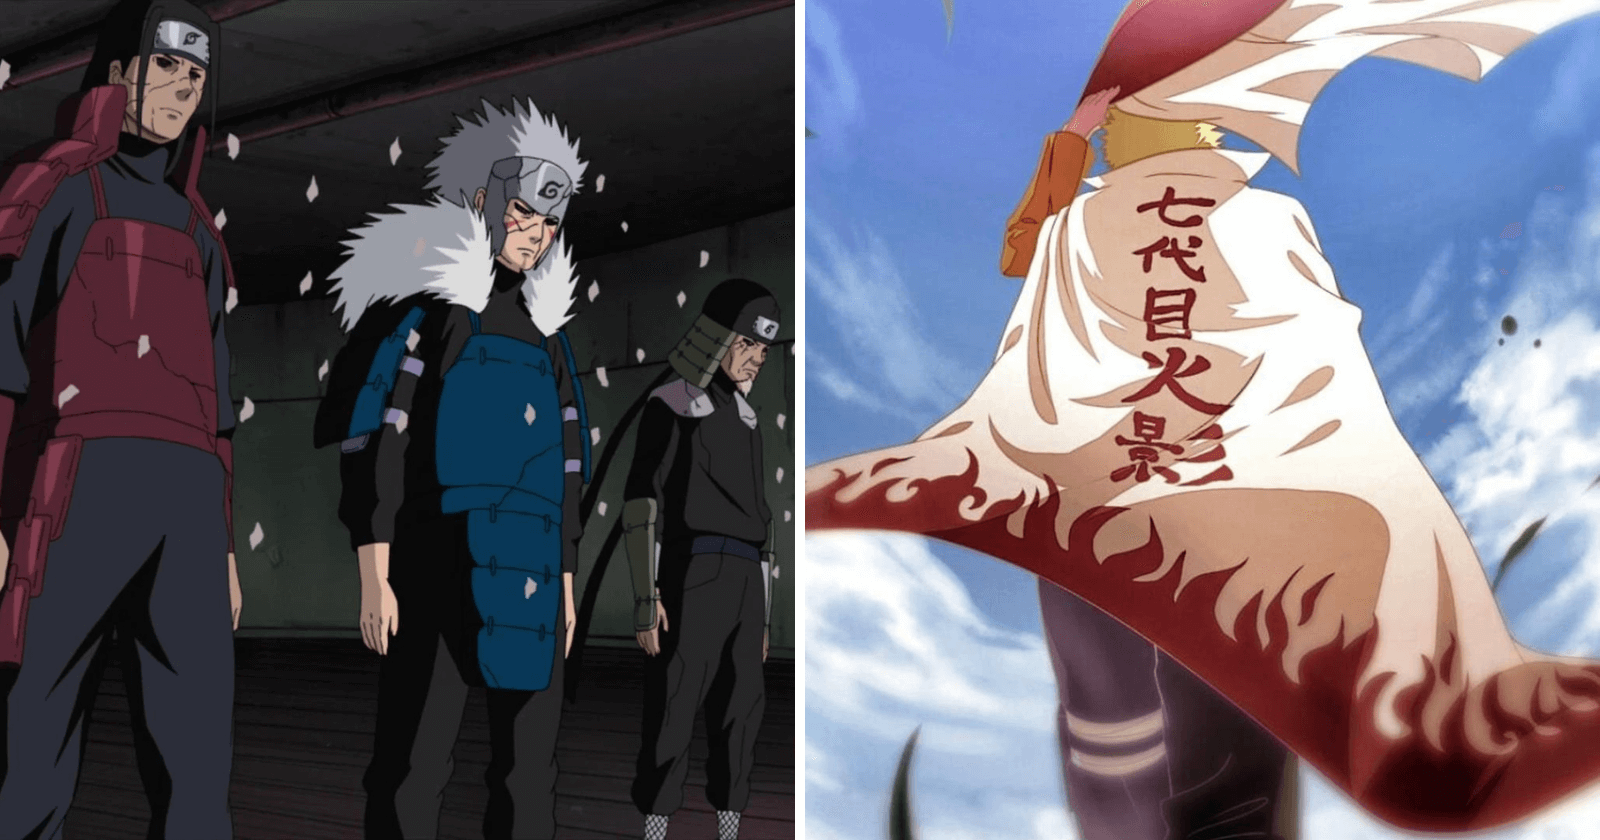 What Does The Back Of Narutos Hokage Cloak Translate To In English